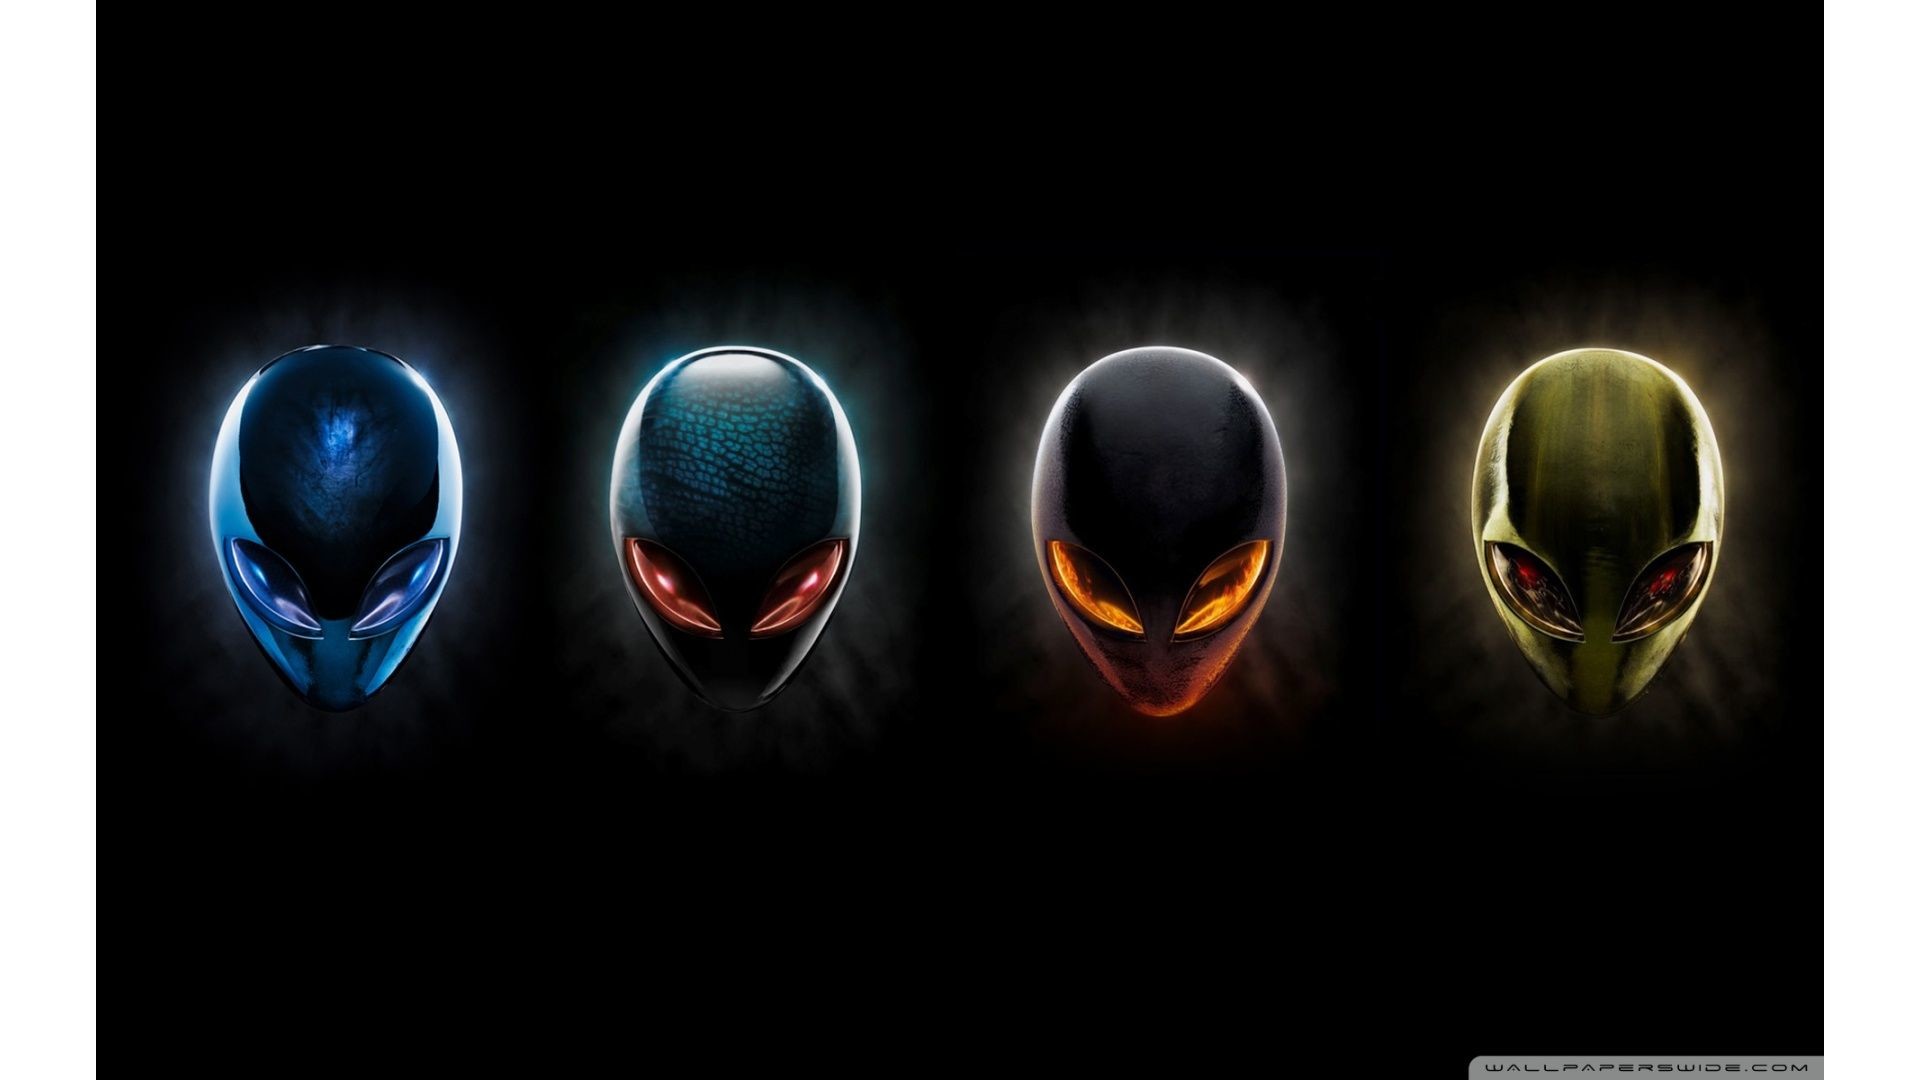 1920x1080 gaming-wallpapers-alienware-games-picture-gaming-wallpapers.jpg (